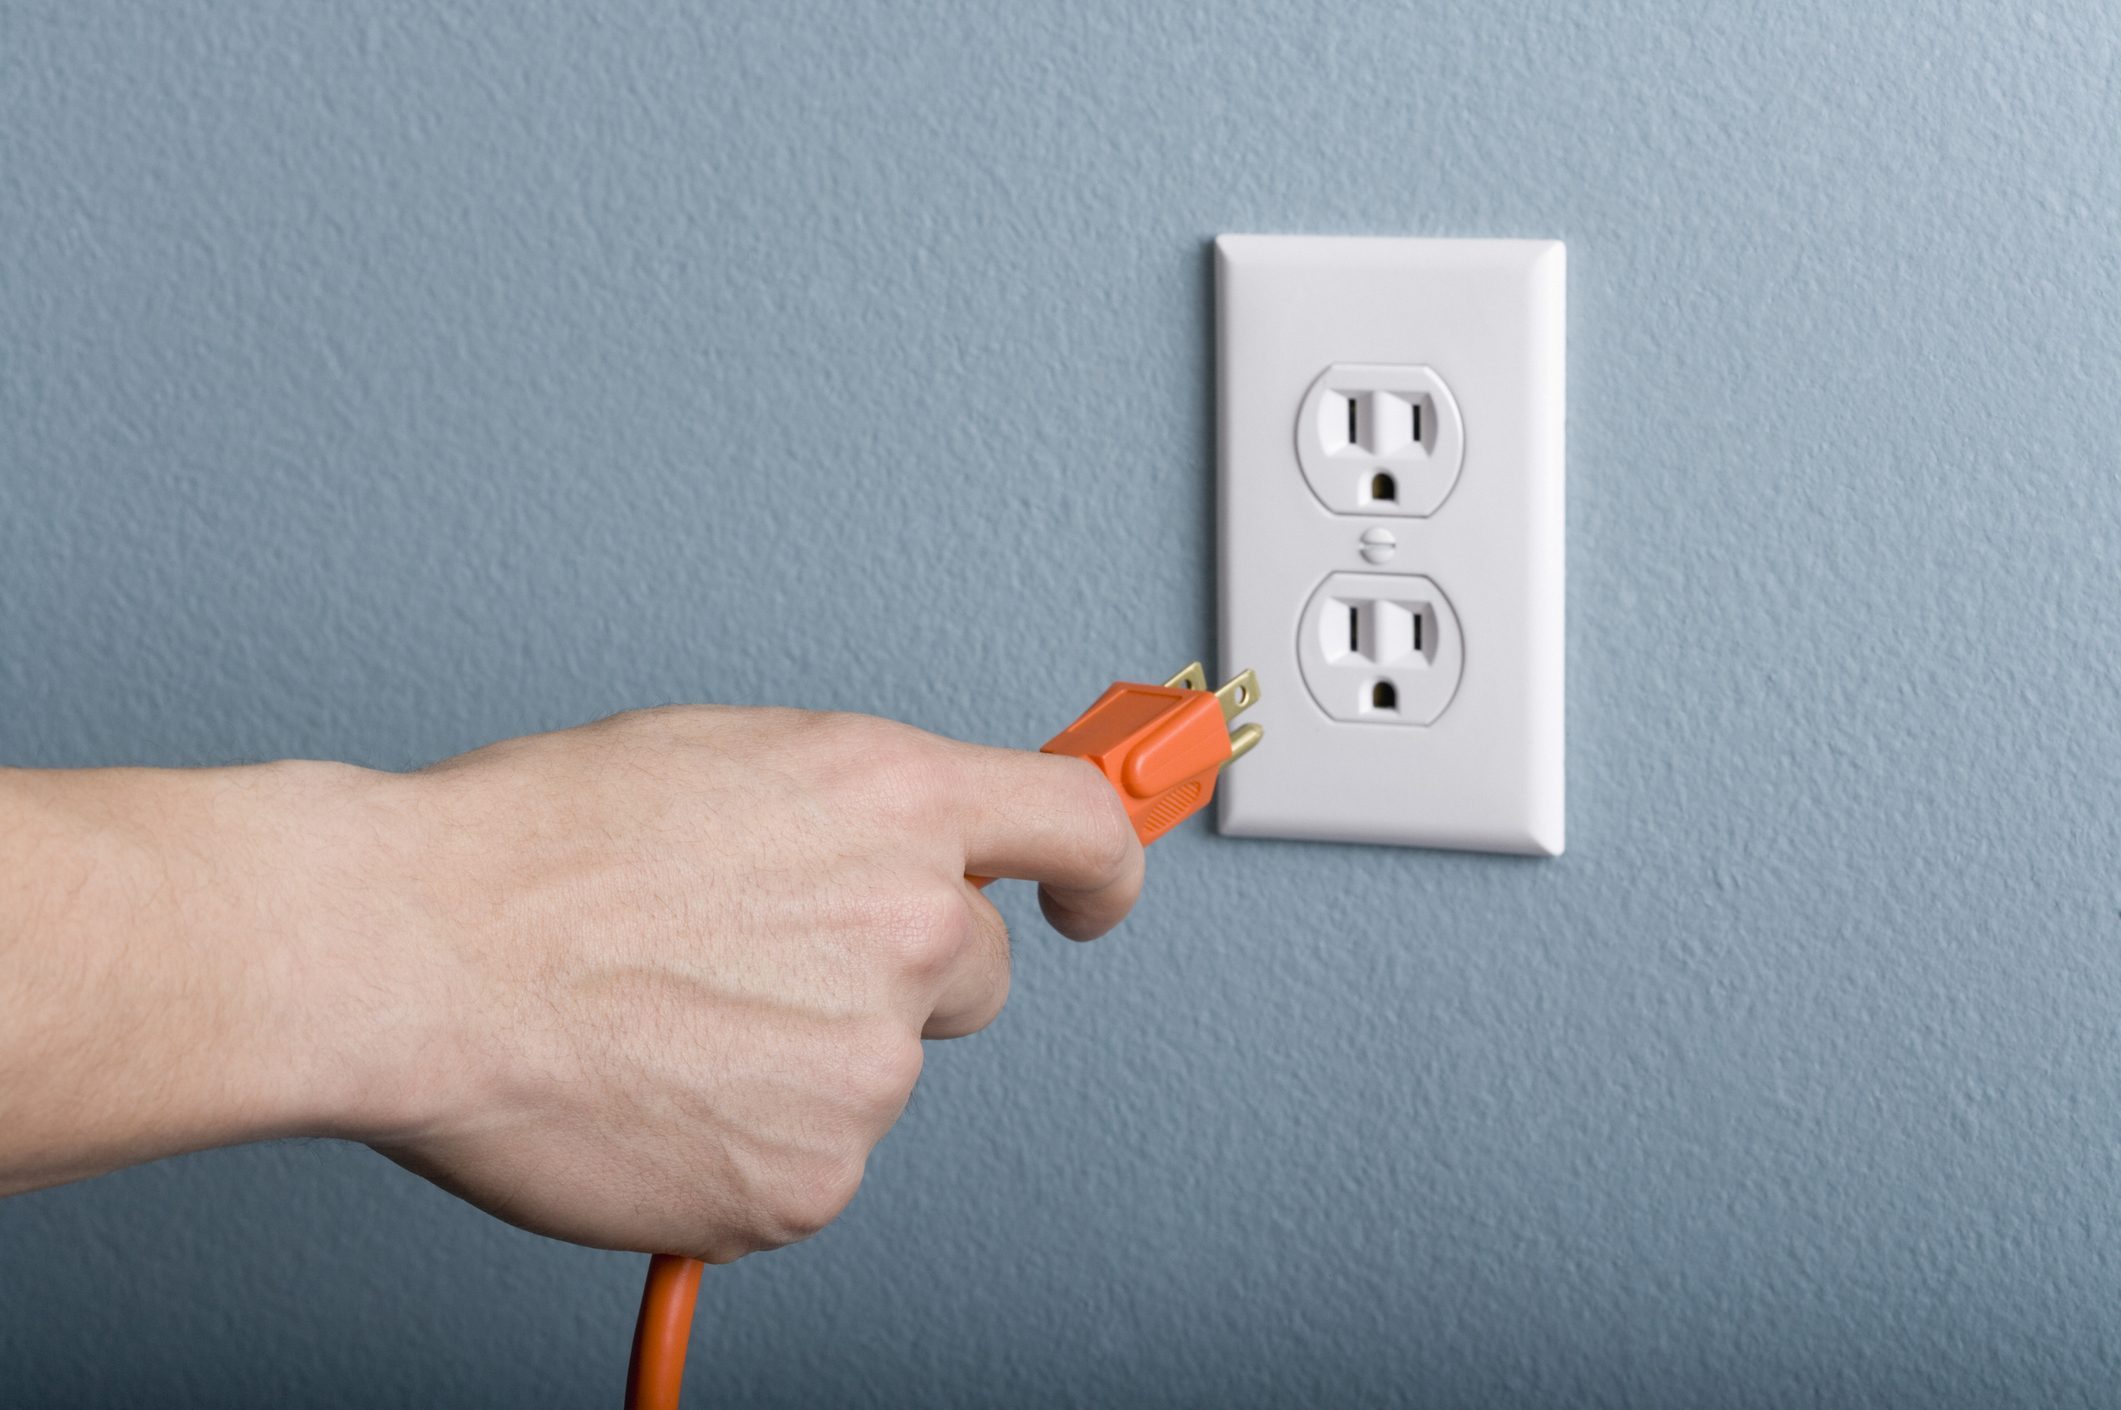 Hand plugging power cord into outlet